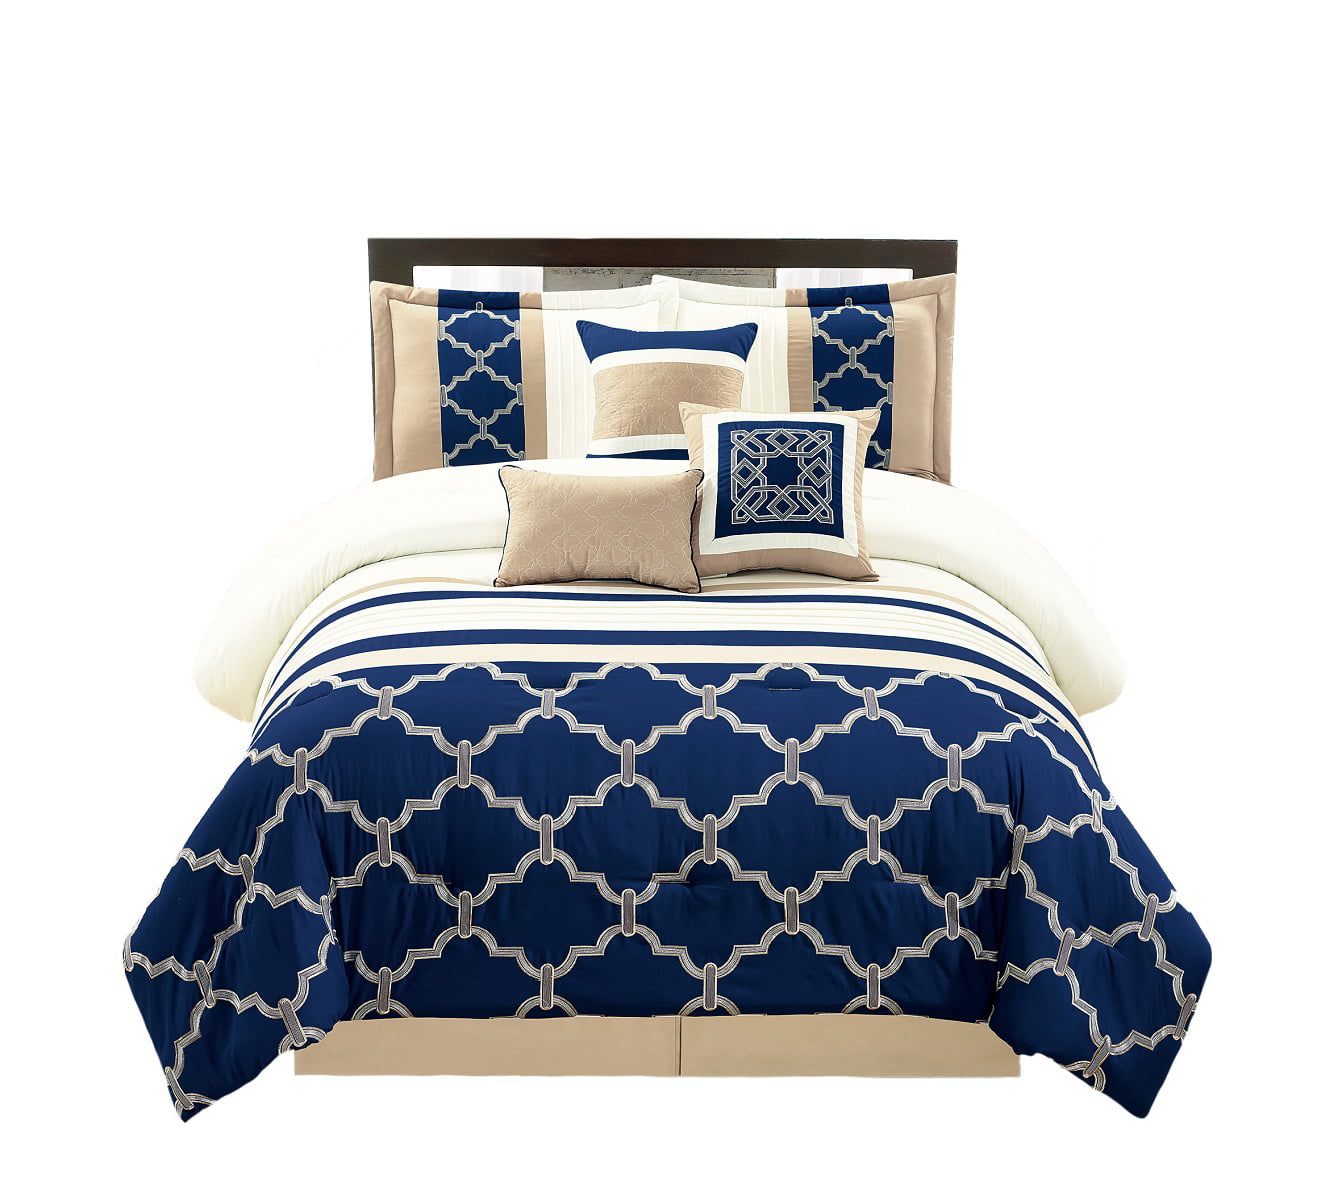 Wpm 7 Pieces Complete Bedding Ensemble, Navy Blue Queen Size Bedspreads